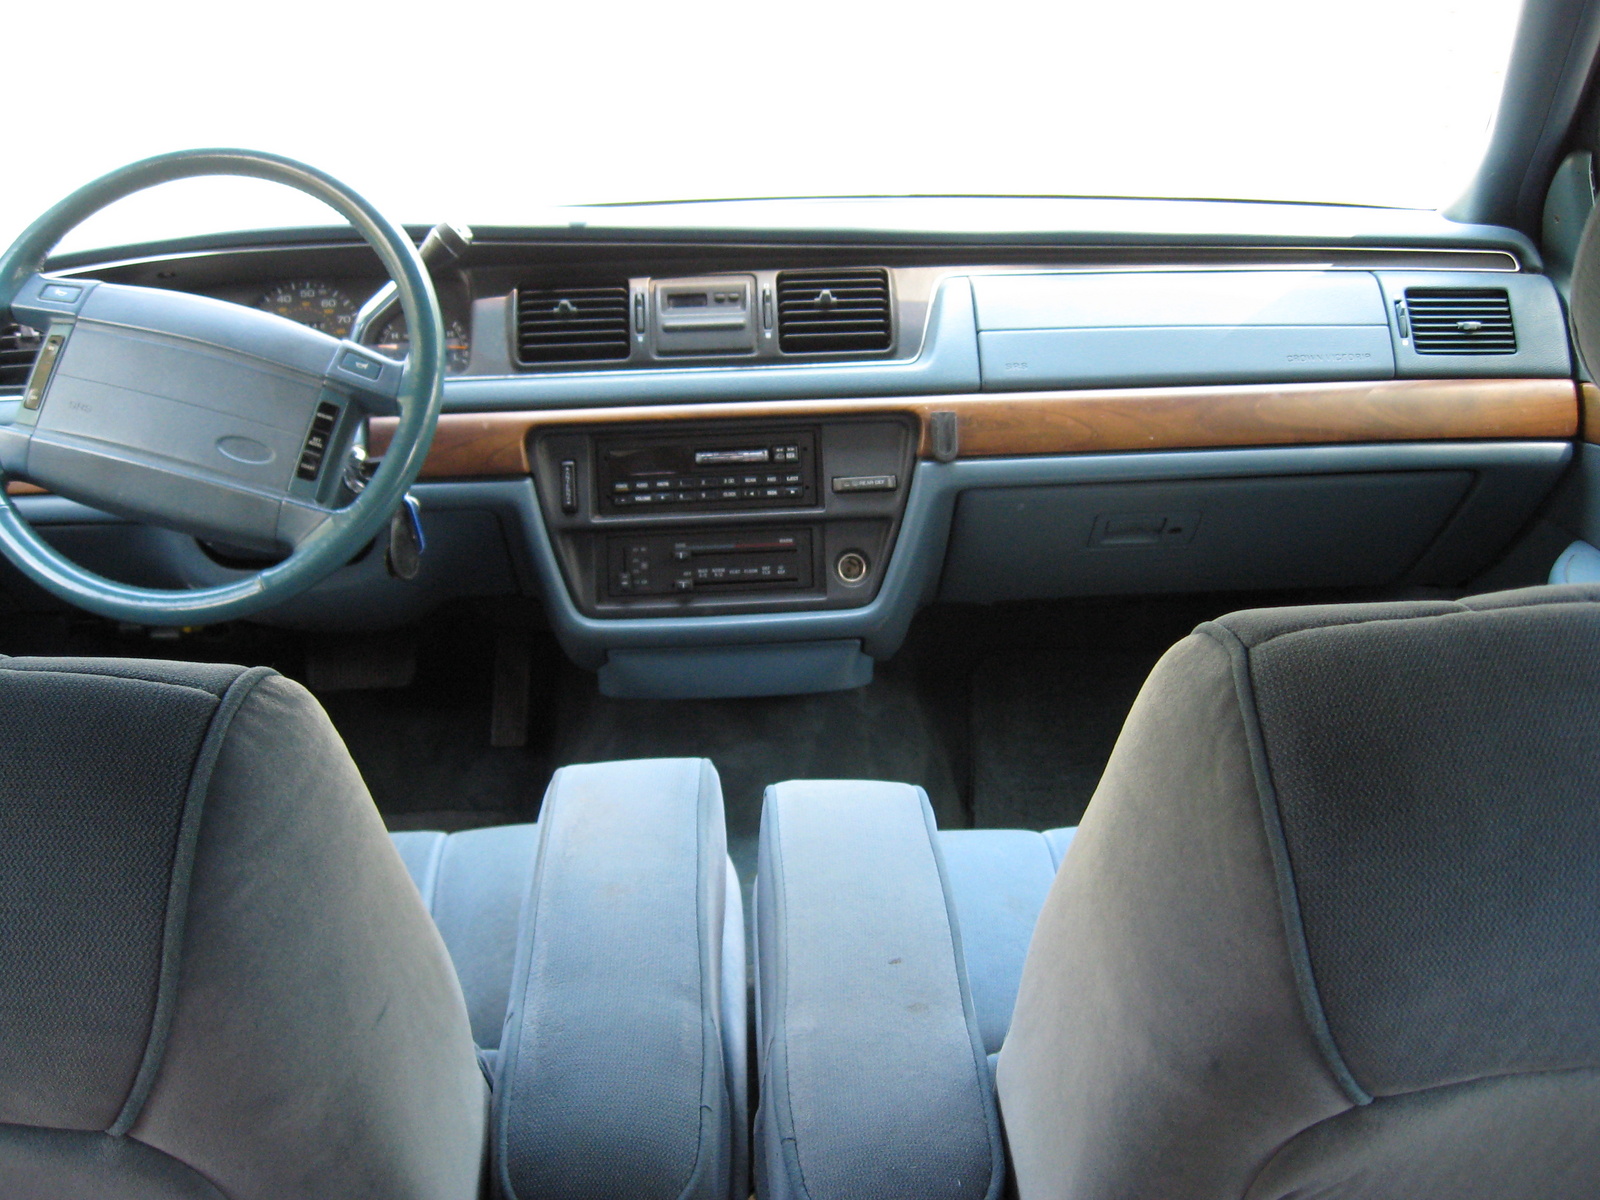 1993 Ford crown victoria specs #3